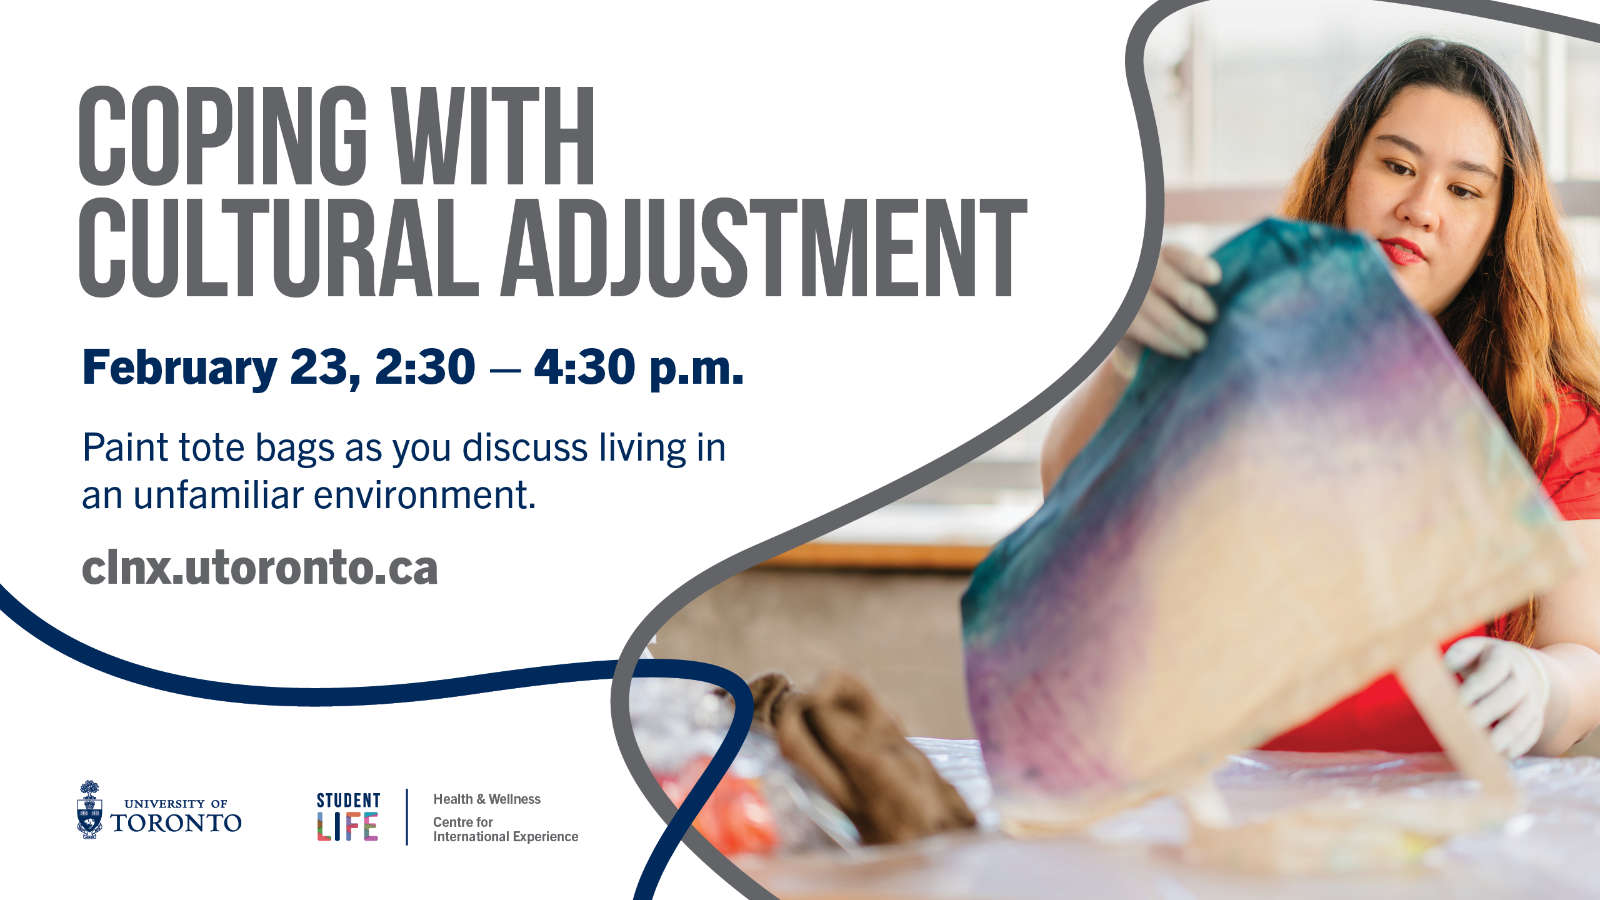 A photo of a person painting a tote bag, with text "Coping with Cultural Adjustment; February 23, 2:30 - 4:30 p.m. Paint tote bags as you discuss living in an unfamiliar environment. clnx.utoronto.ca"